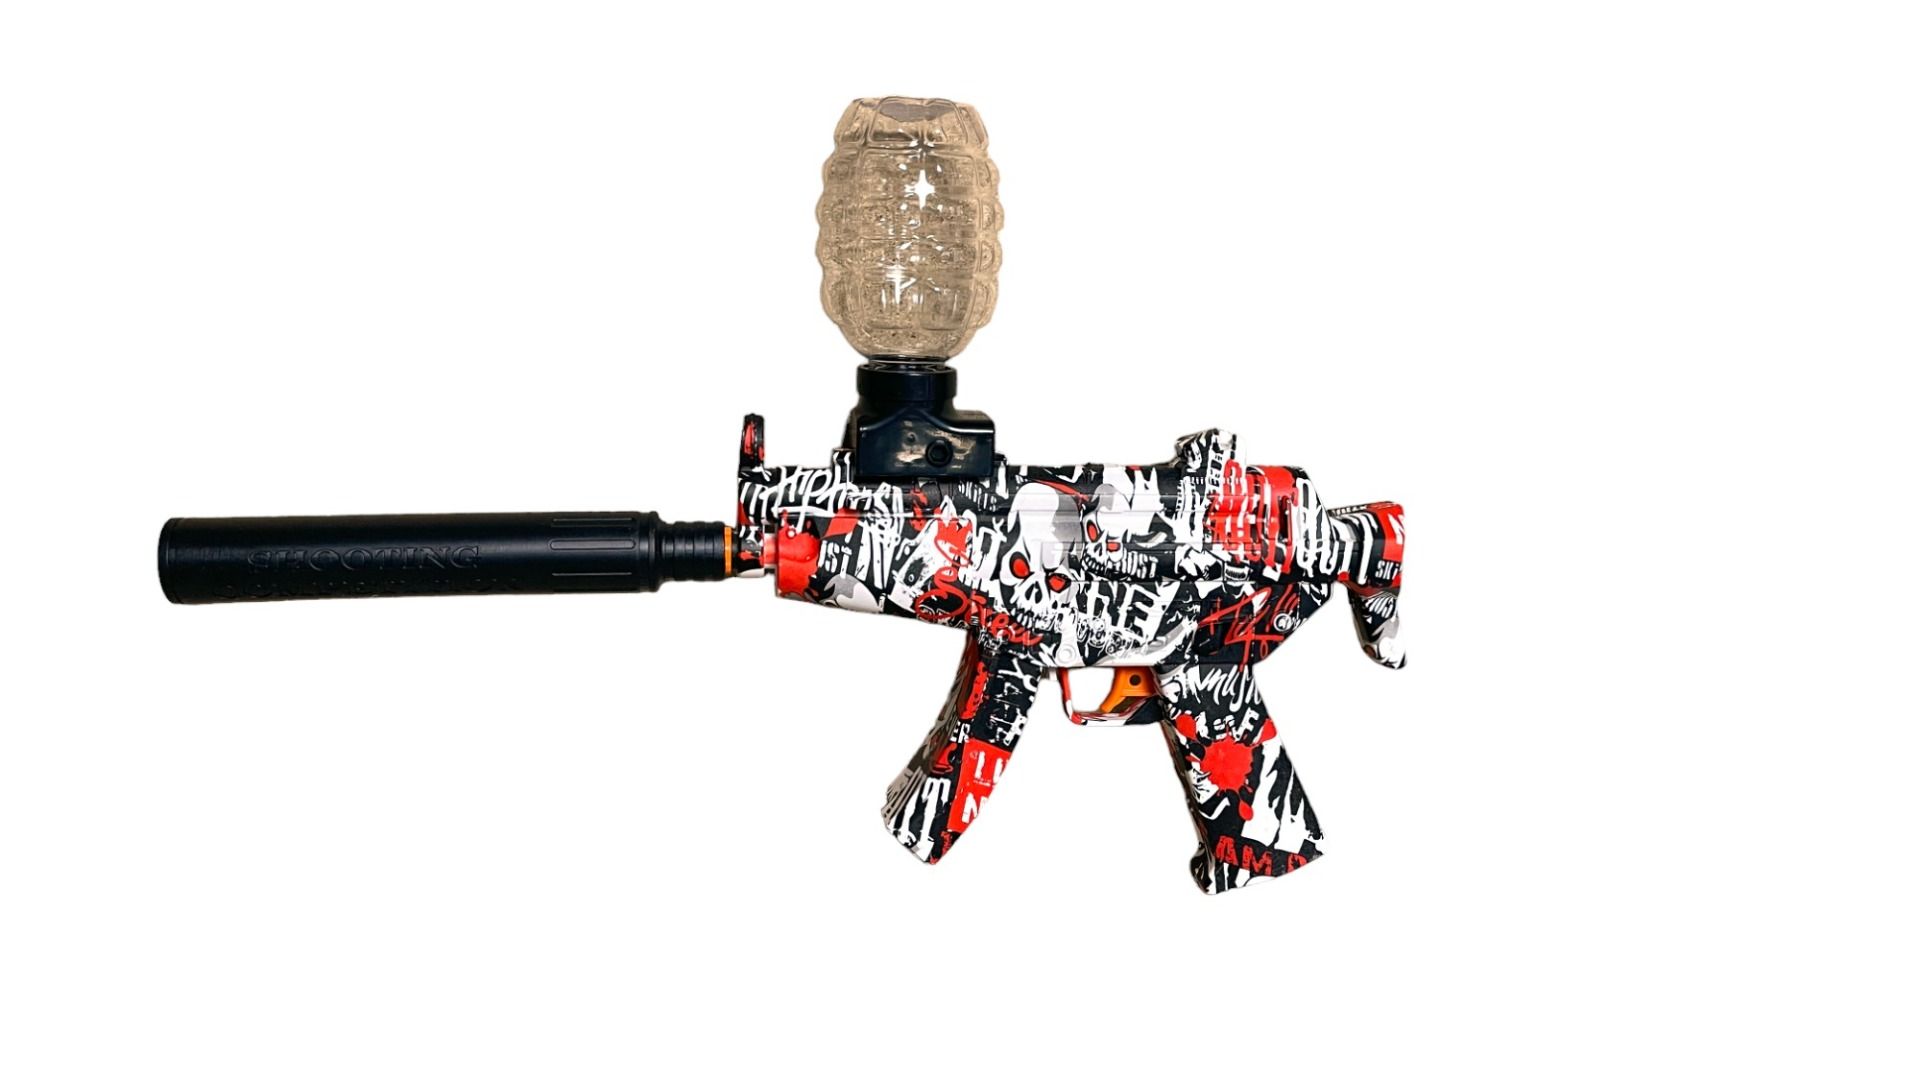 Gel Blaster - AK with Silencer - 3:4 Scale - Colours May Vary - Includes Battery and Charger